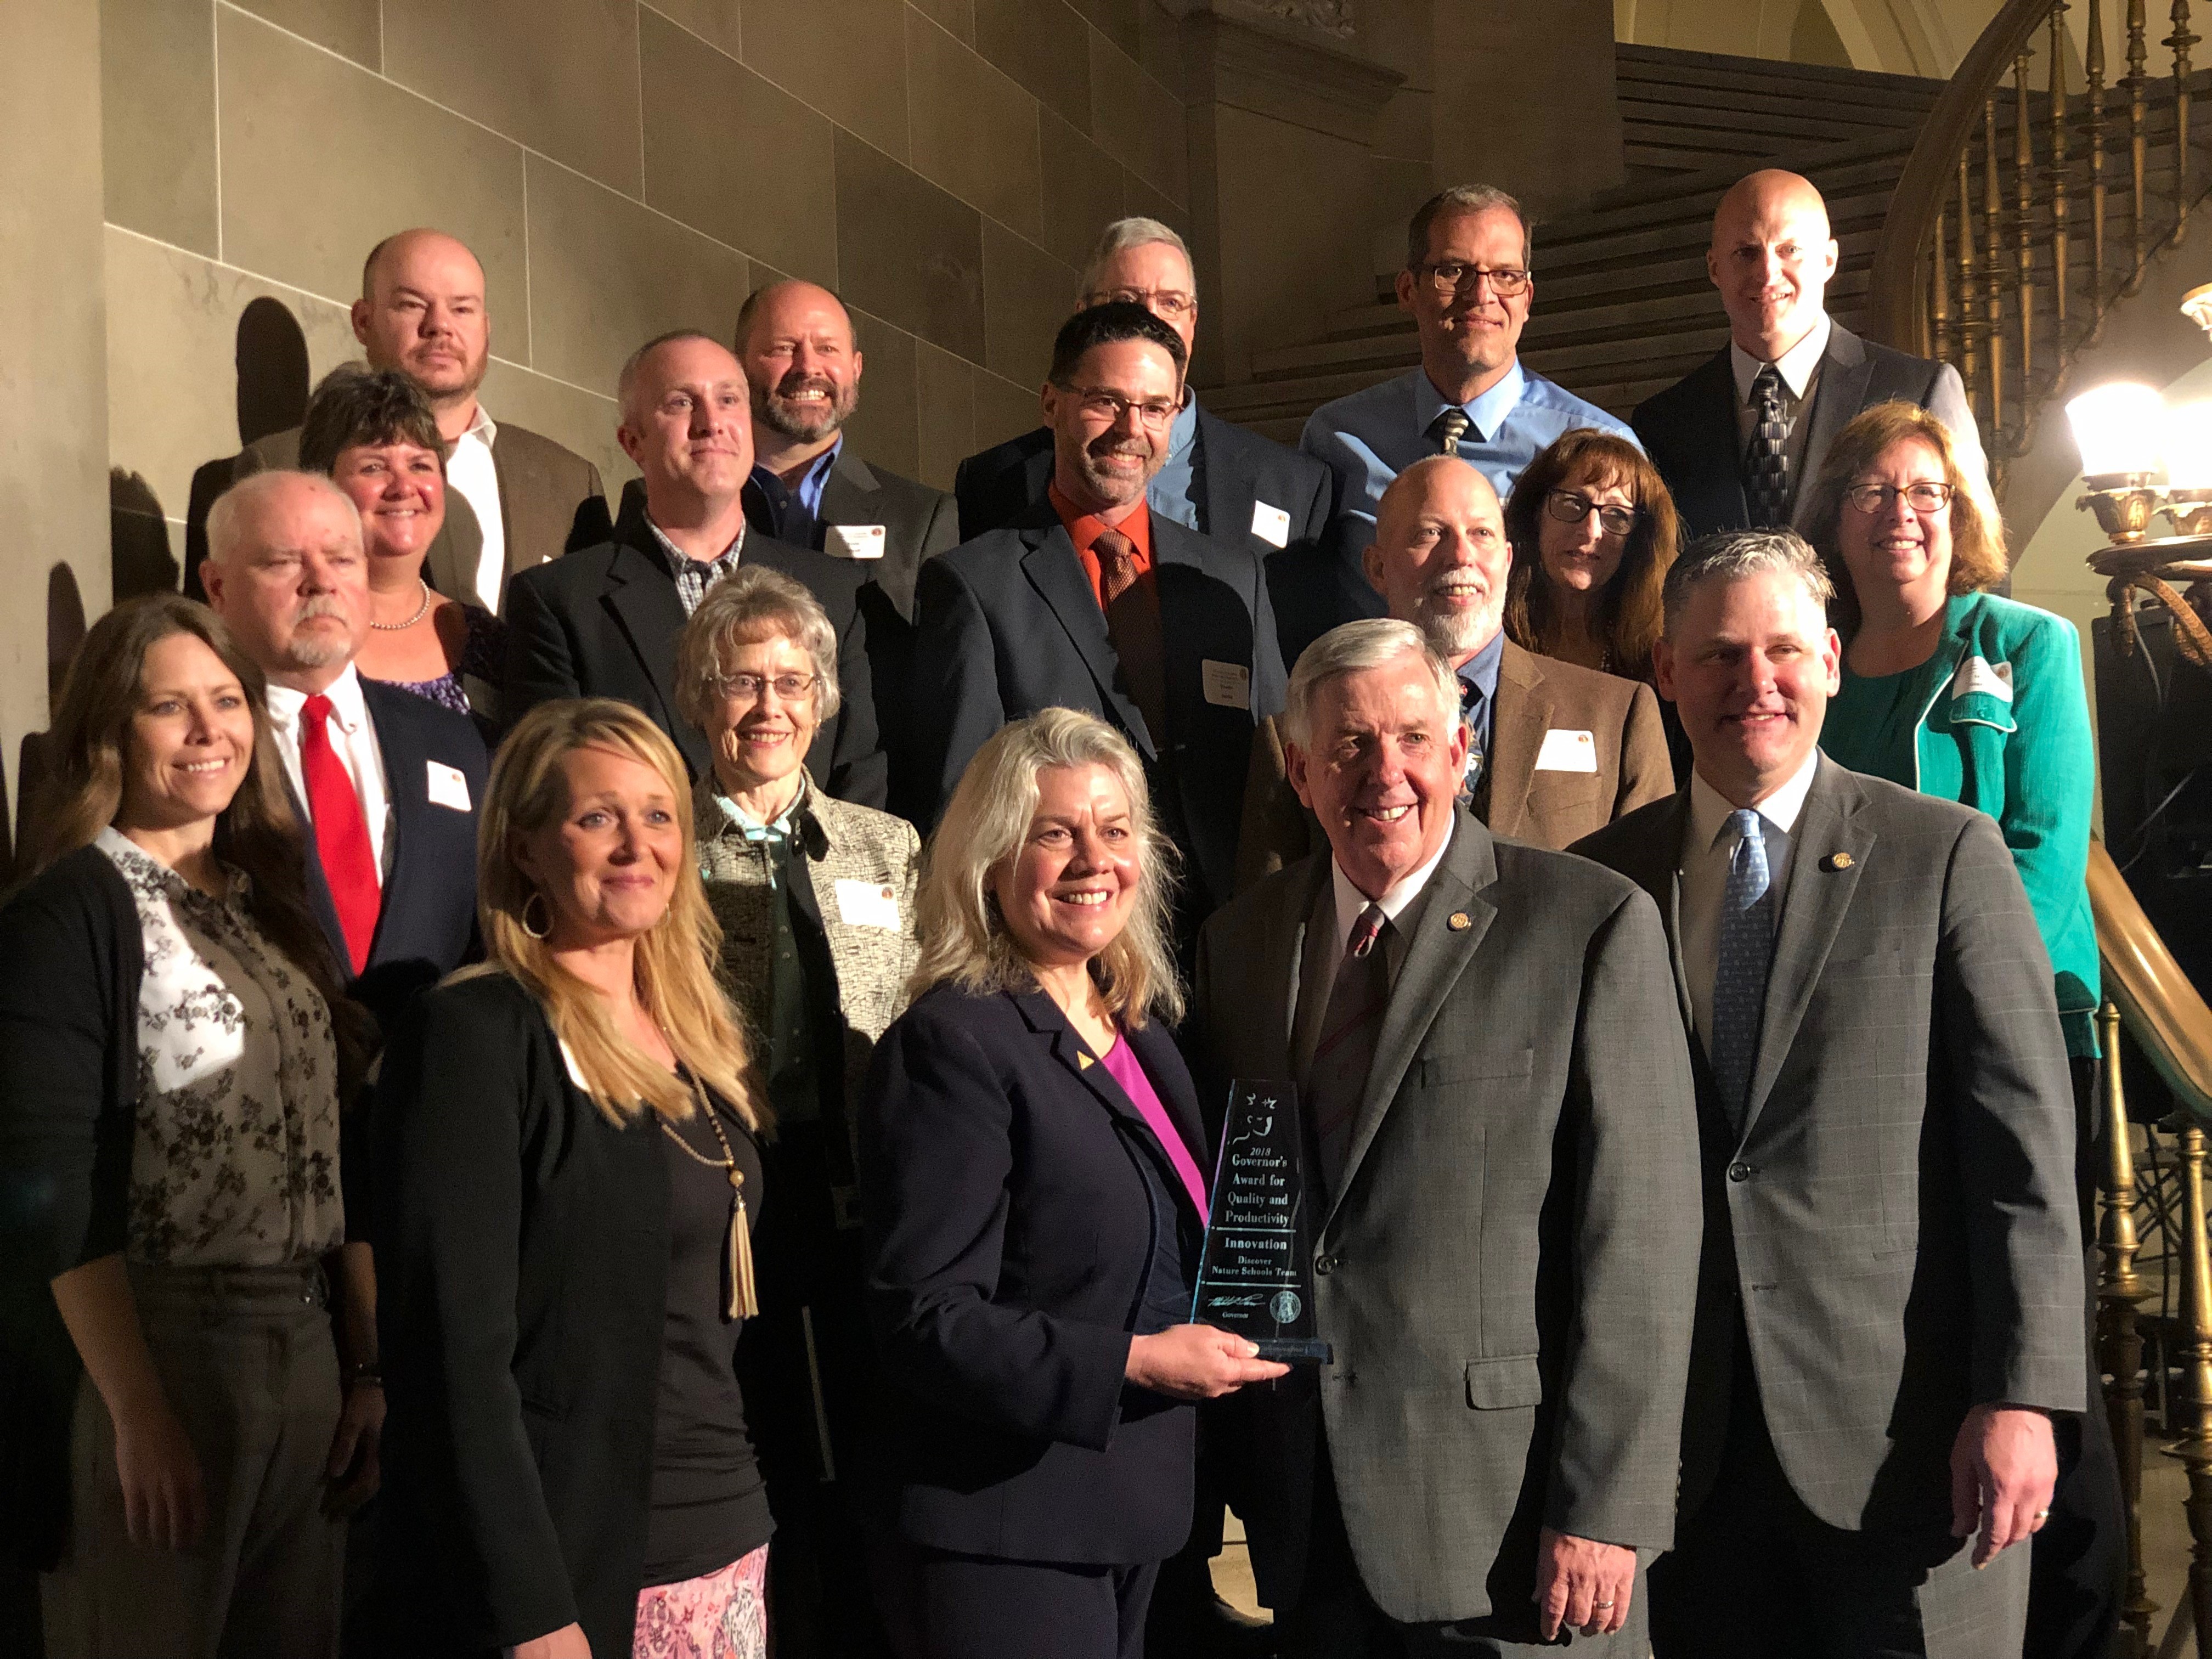 MDC Director Sara Parker Pauley poses with Governor Mike Parson and the DNS team after they received the Governor's Award for Innovation.